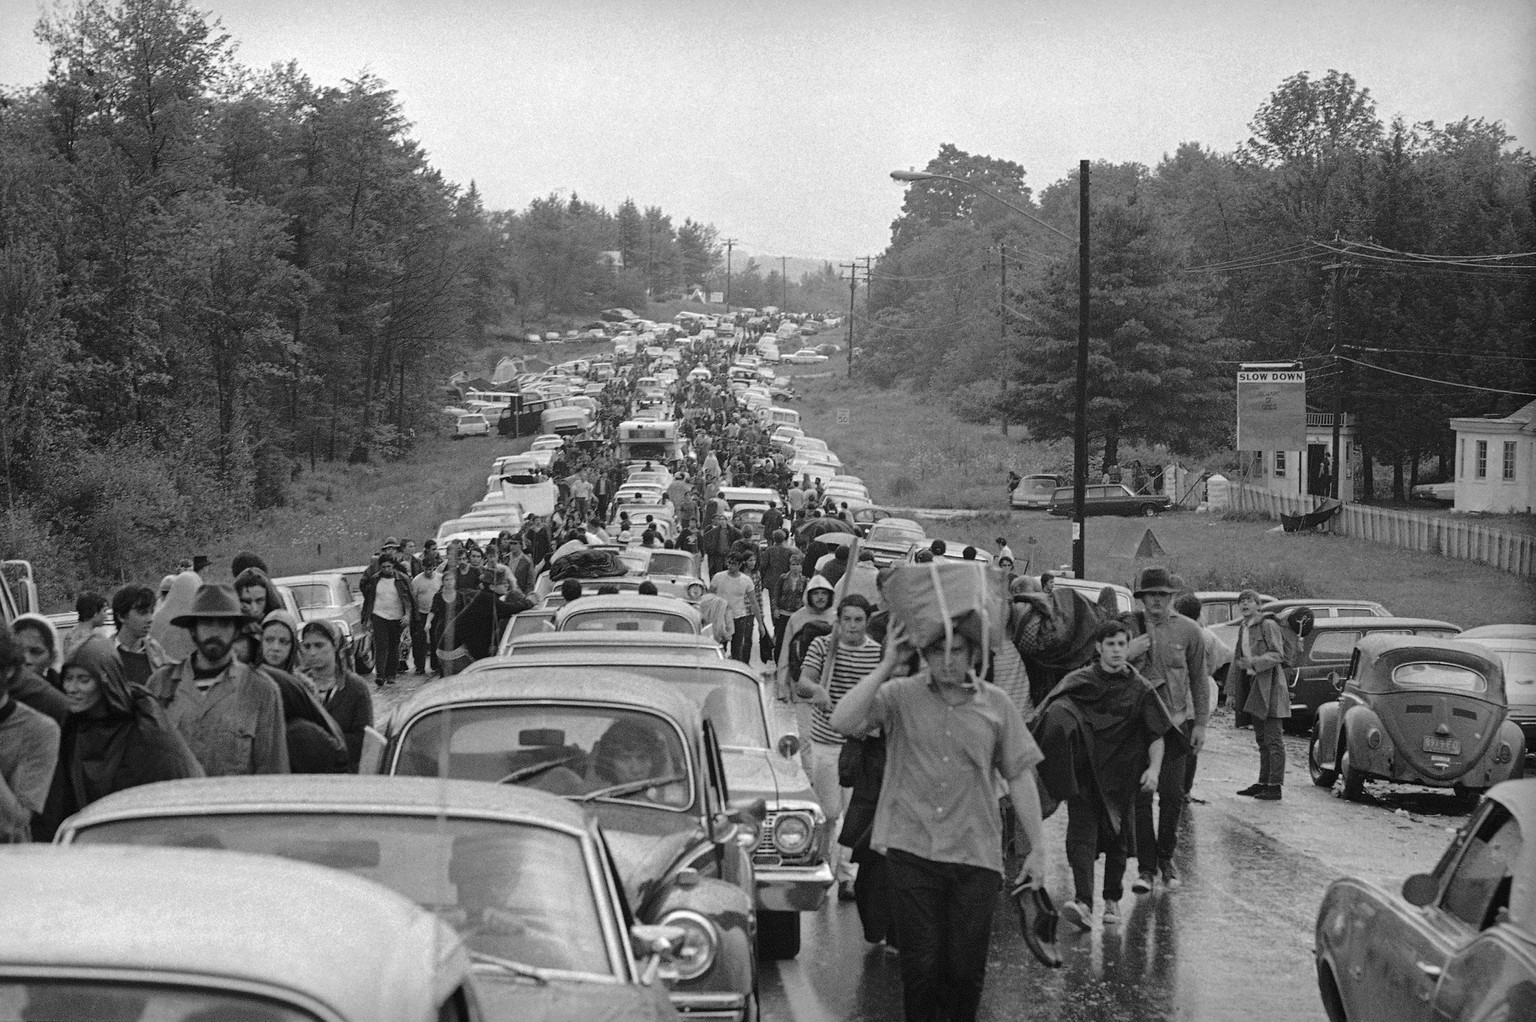 FILE - In this Aug. 16, 1969 file photo, hundreds of rock music fans jam a highway leading from Bethel, N.Y., as they try to leave the Woodstock Music and Art Festival. More than 400,000 people attend ...